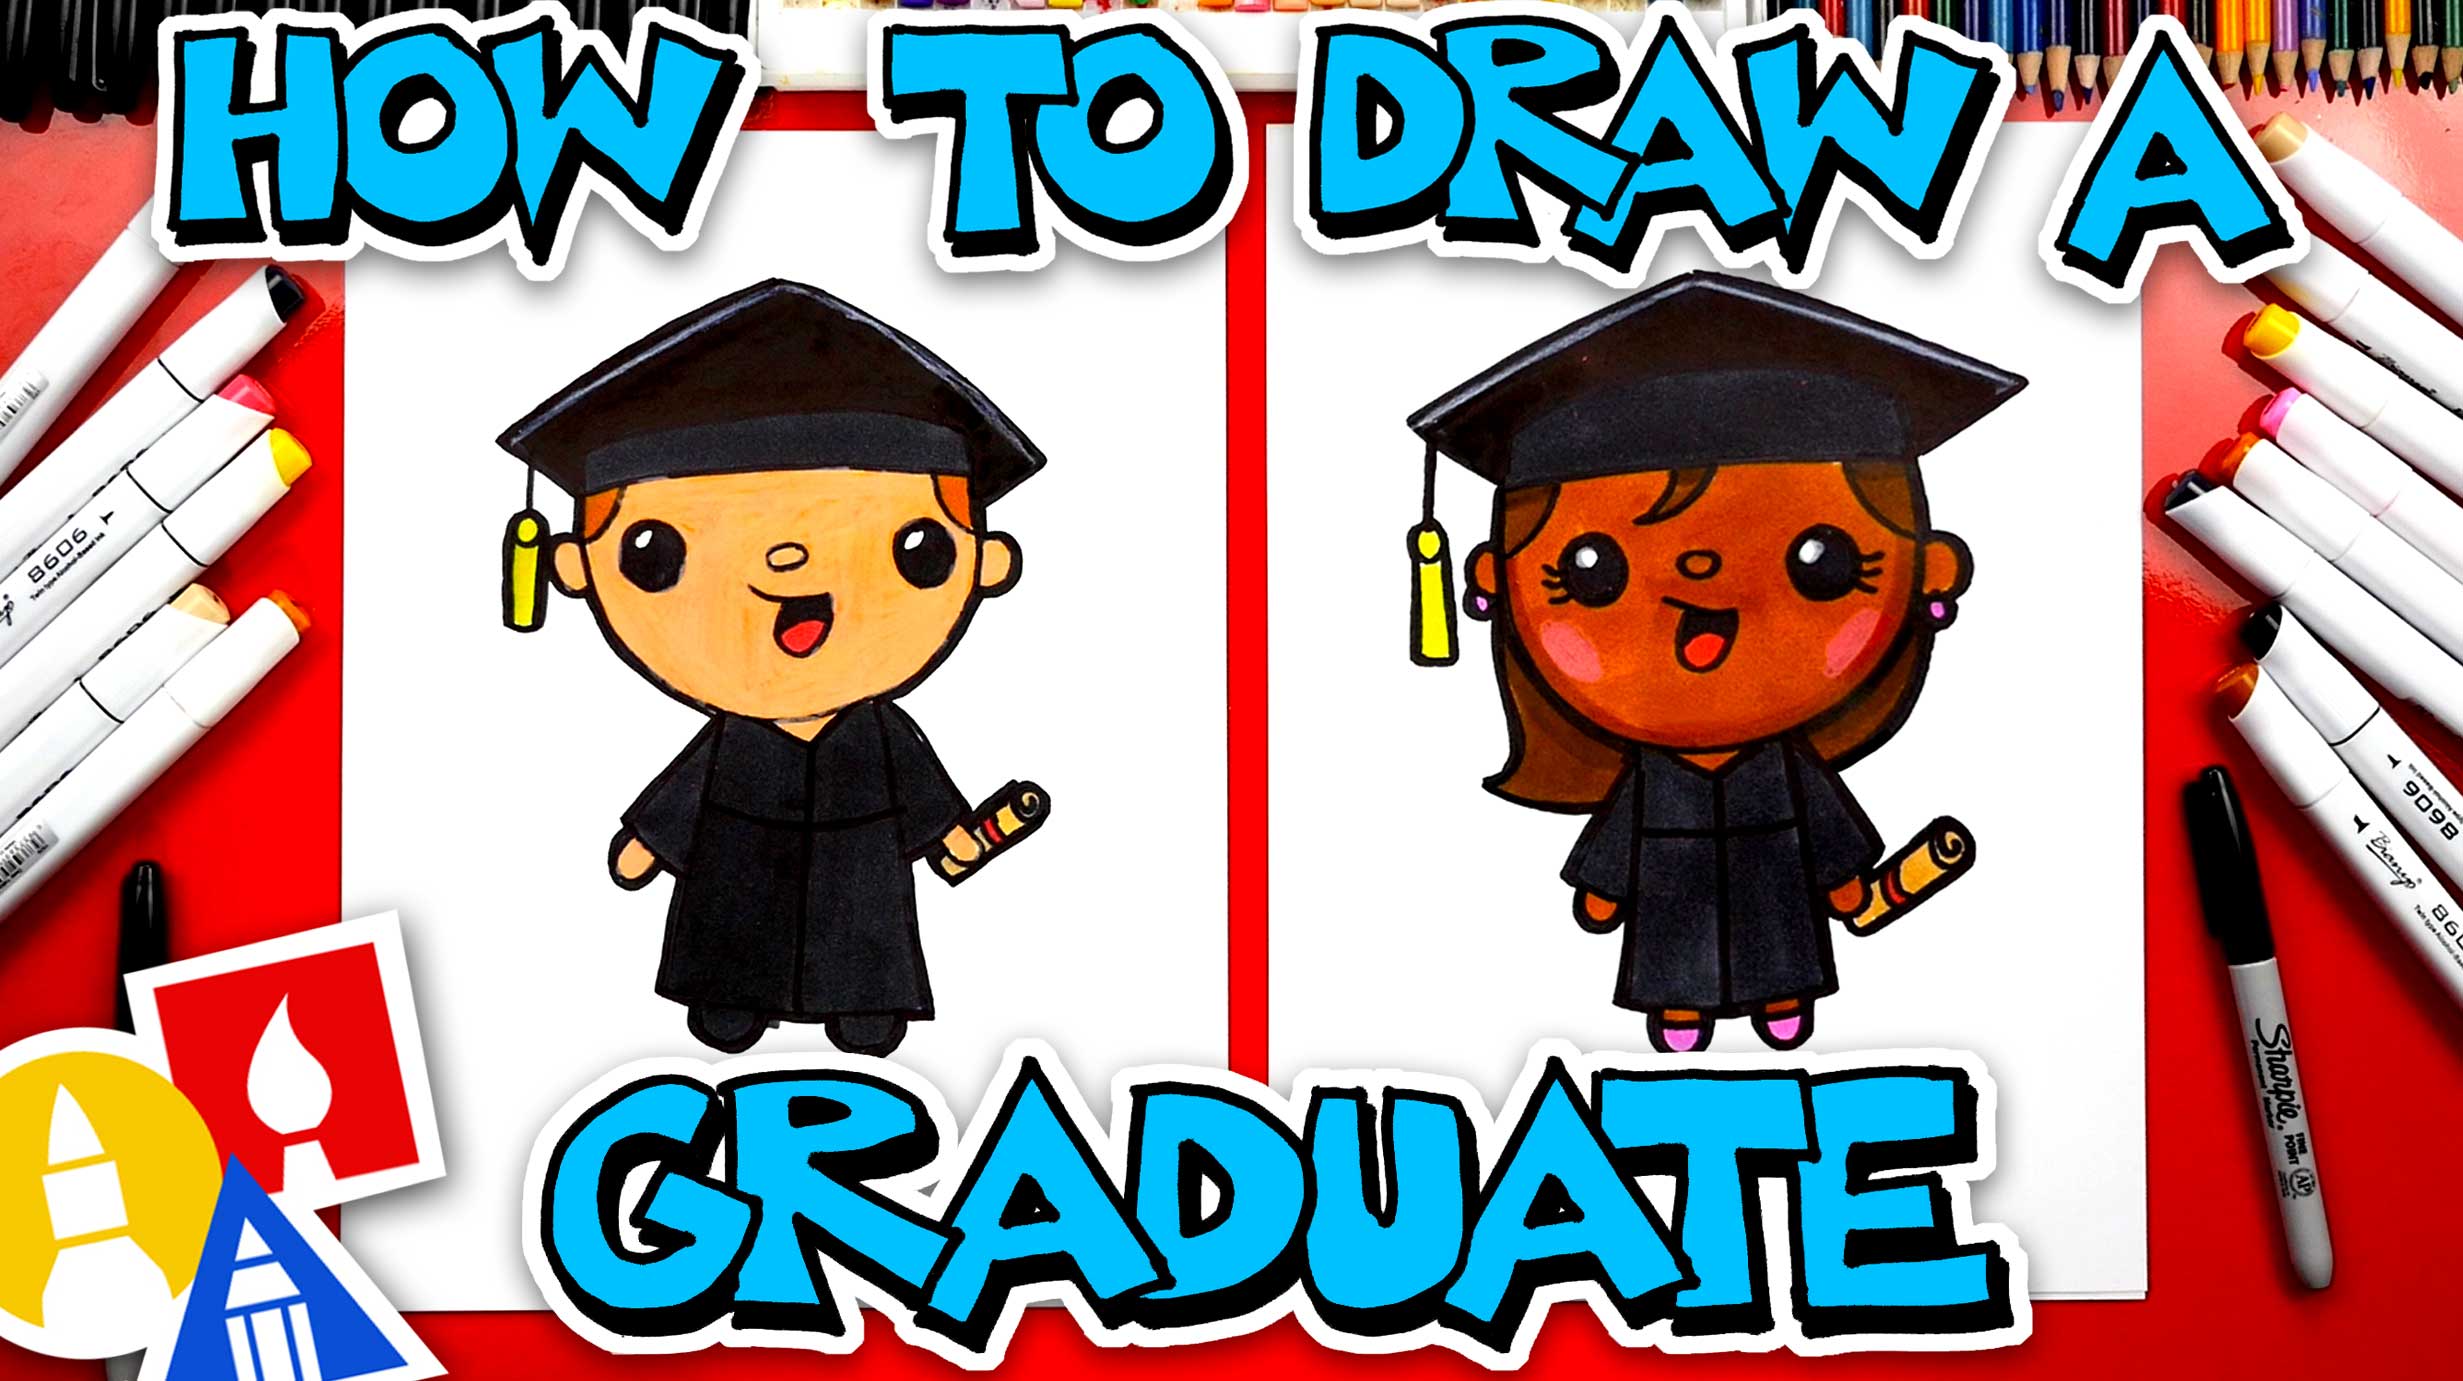 How To Draw A Graduate - Art For Kids Hub